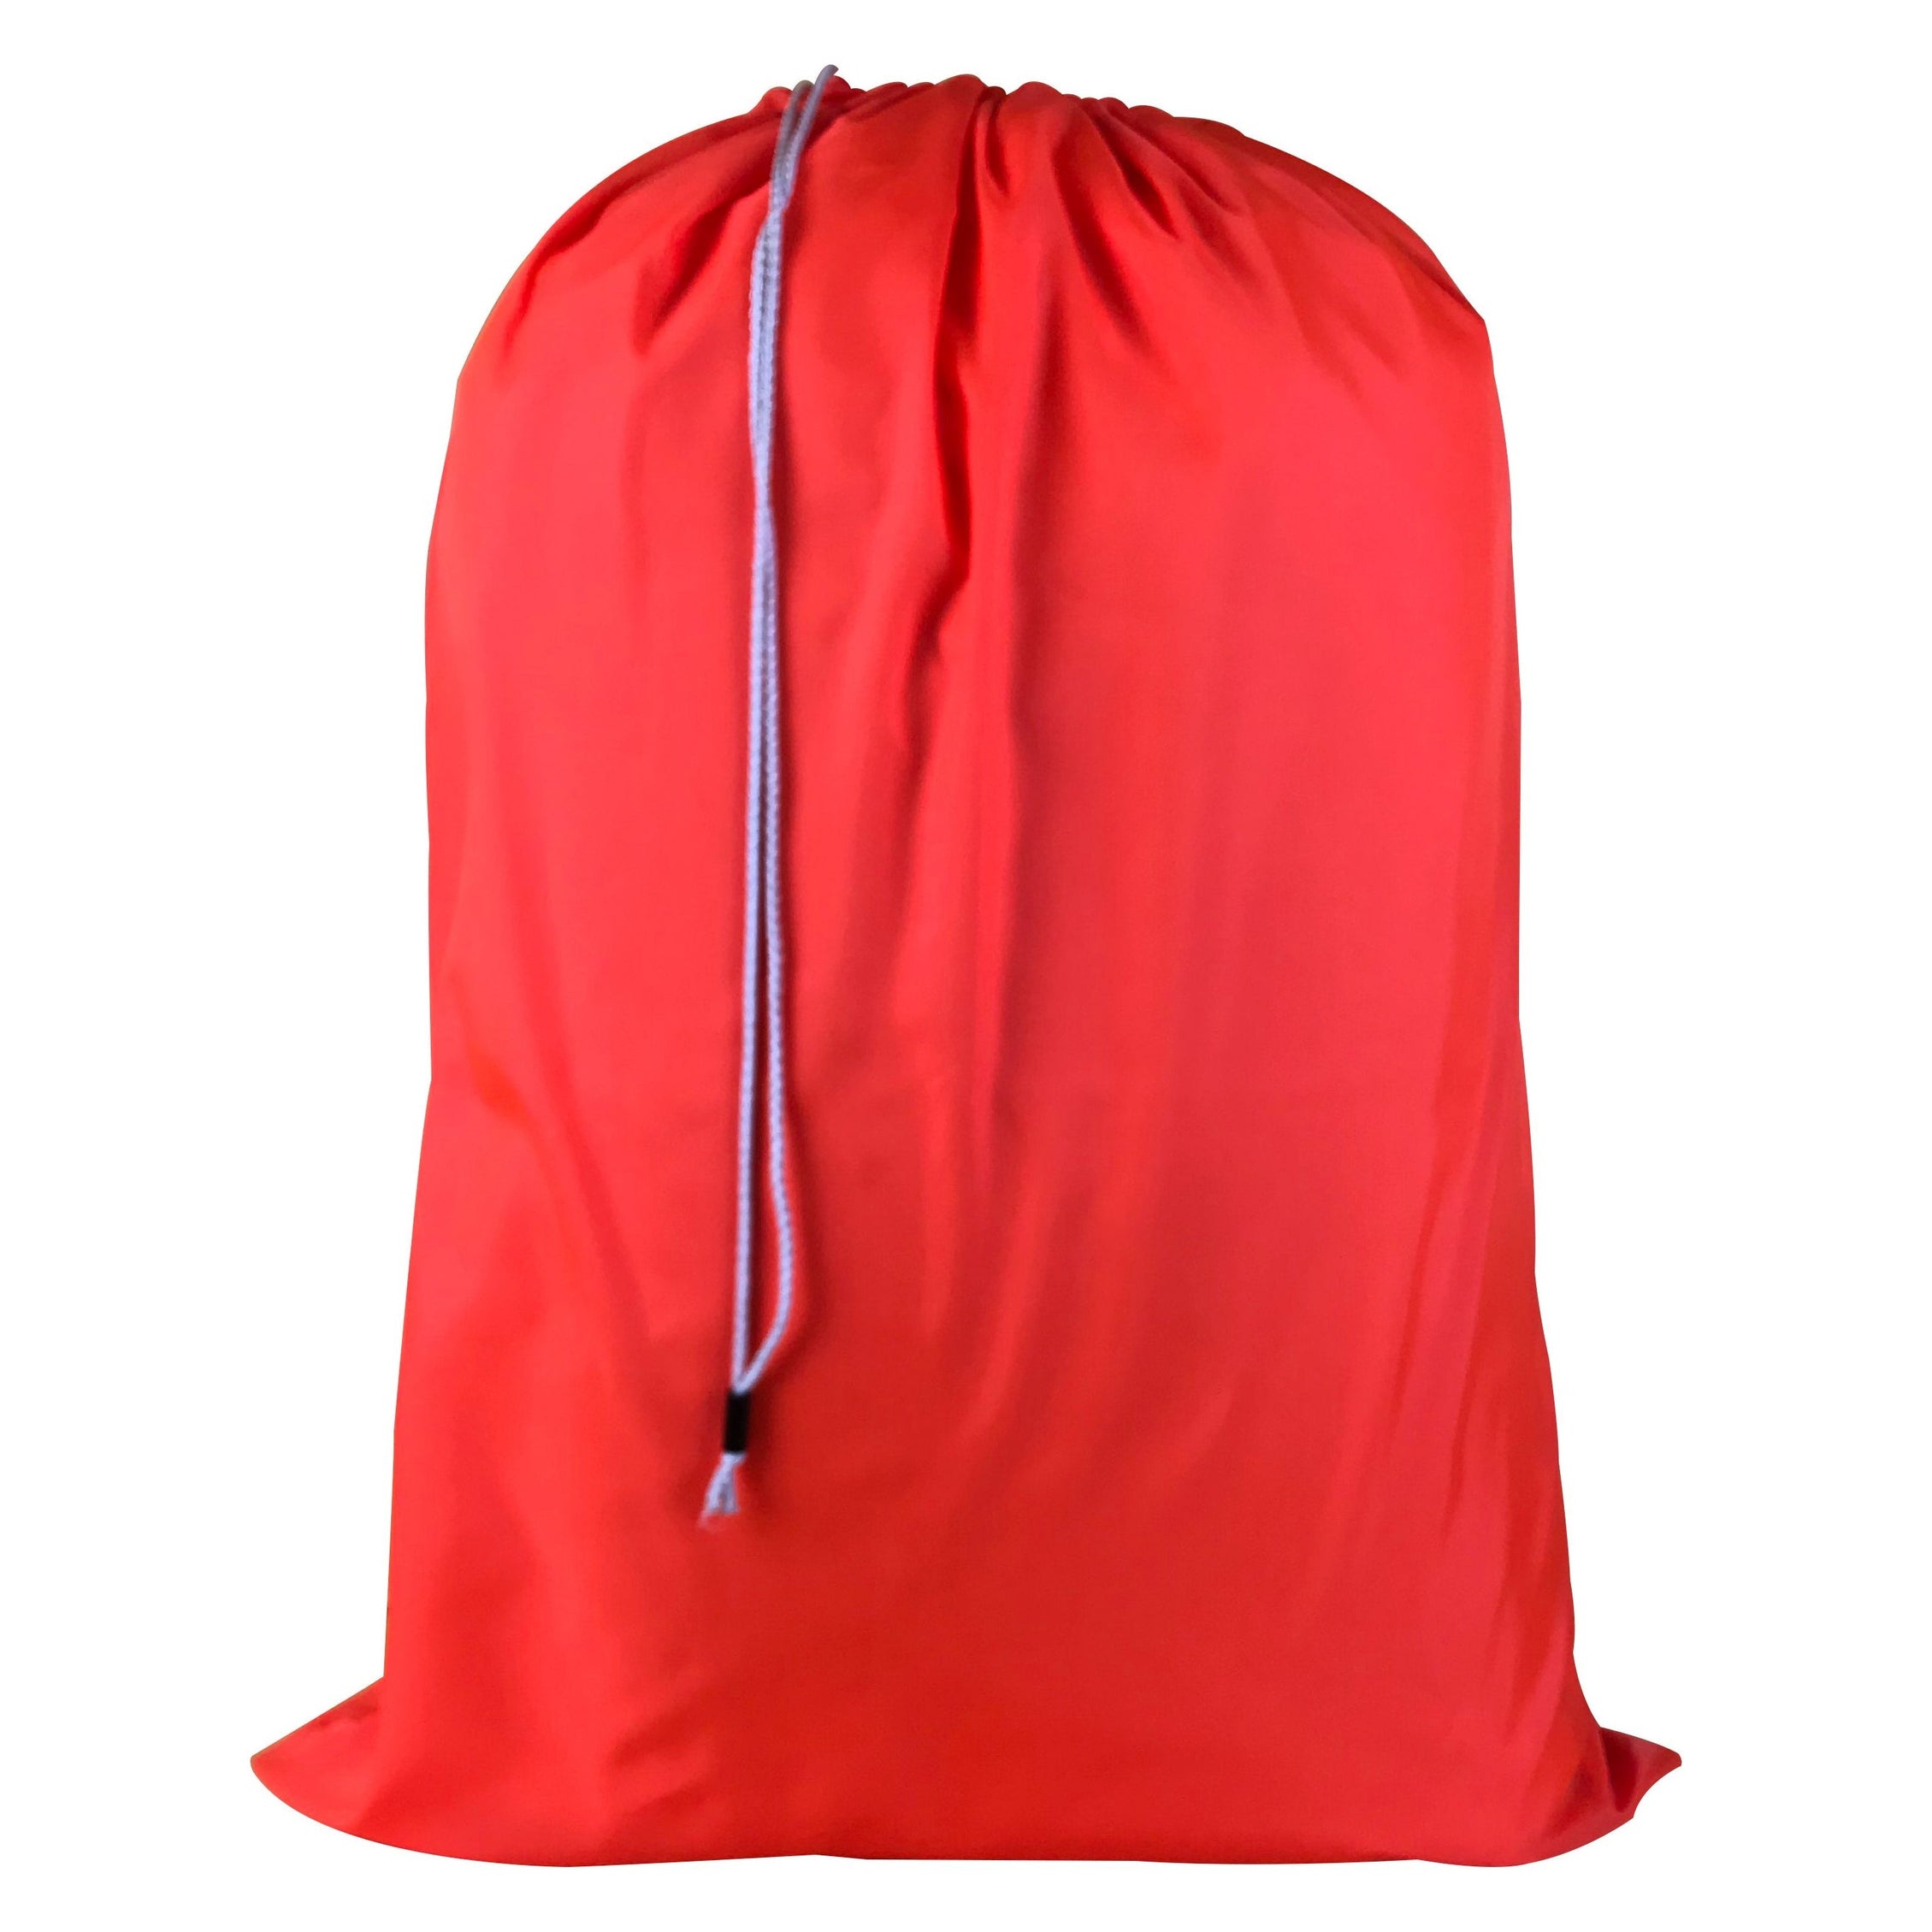 30" x 40" Heavy (210 Denier) Nylon Bags, Color Orange, 50 pieces/box, Sold by the Box, Price for 1 bag - $3.95 each bag